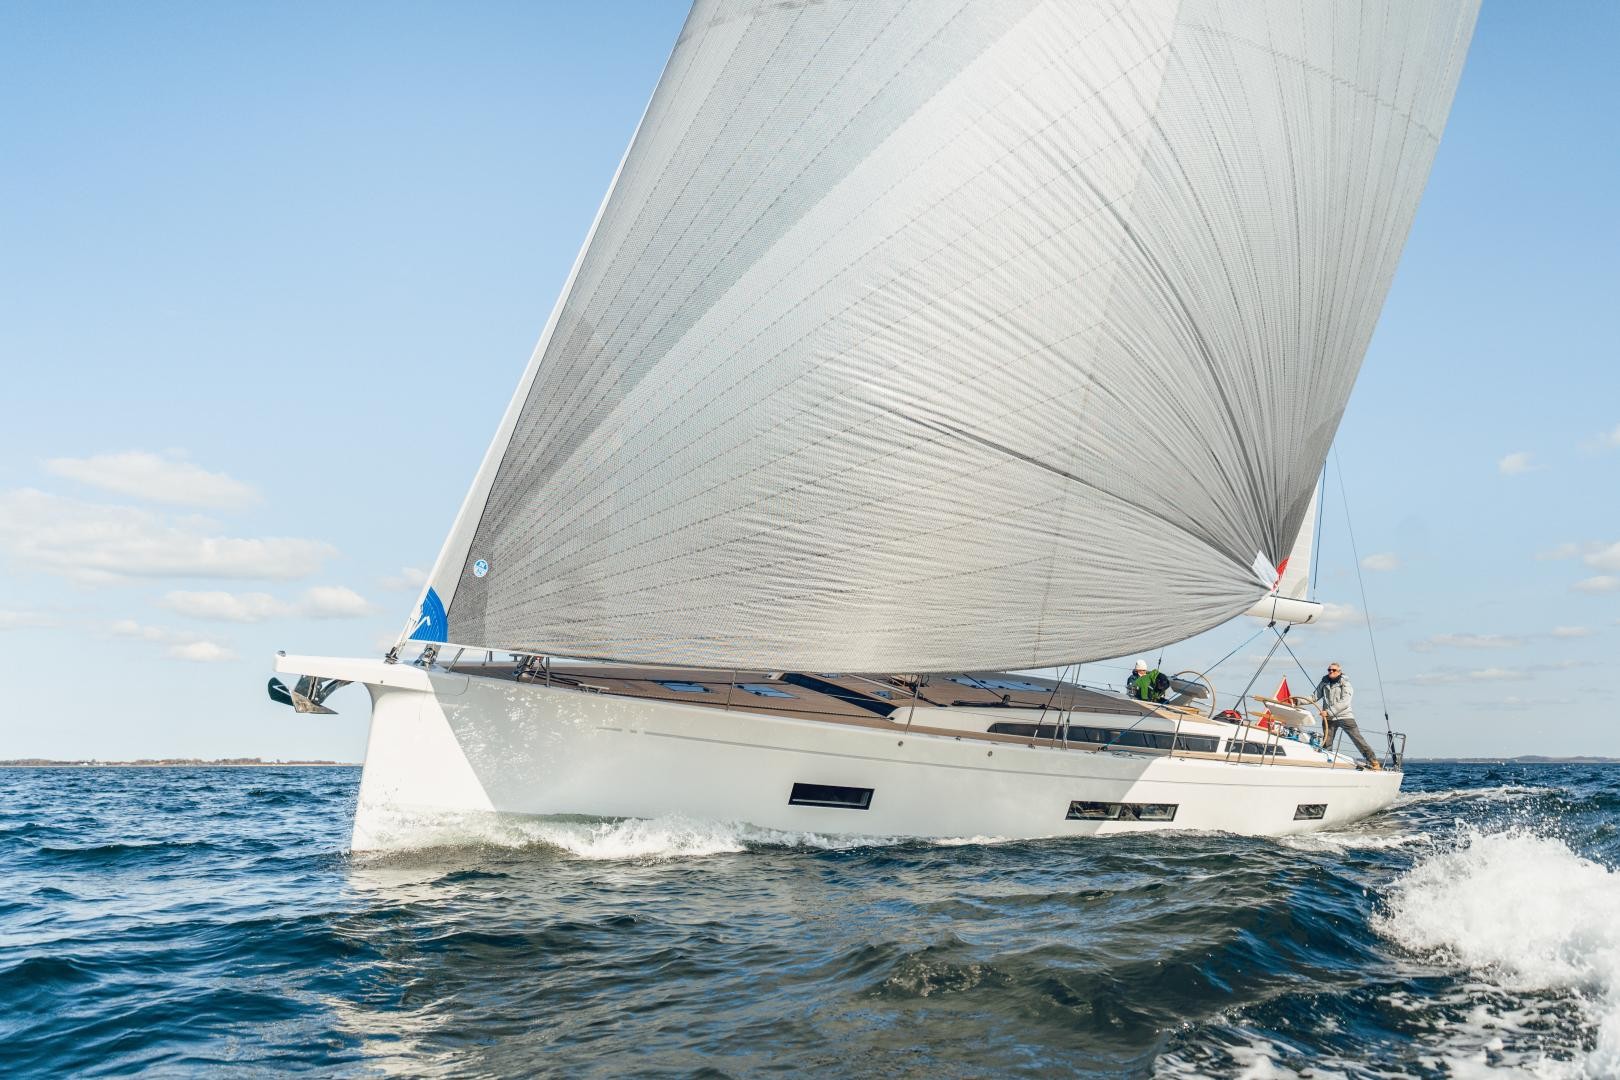 The bow shape maximises the headsailsʼ J measurement to boost performance.